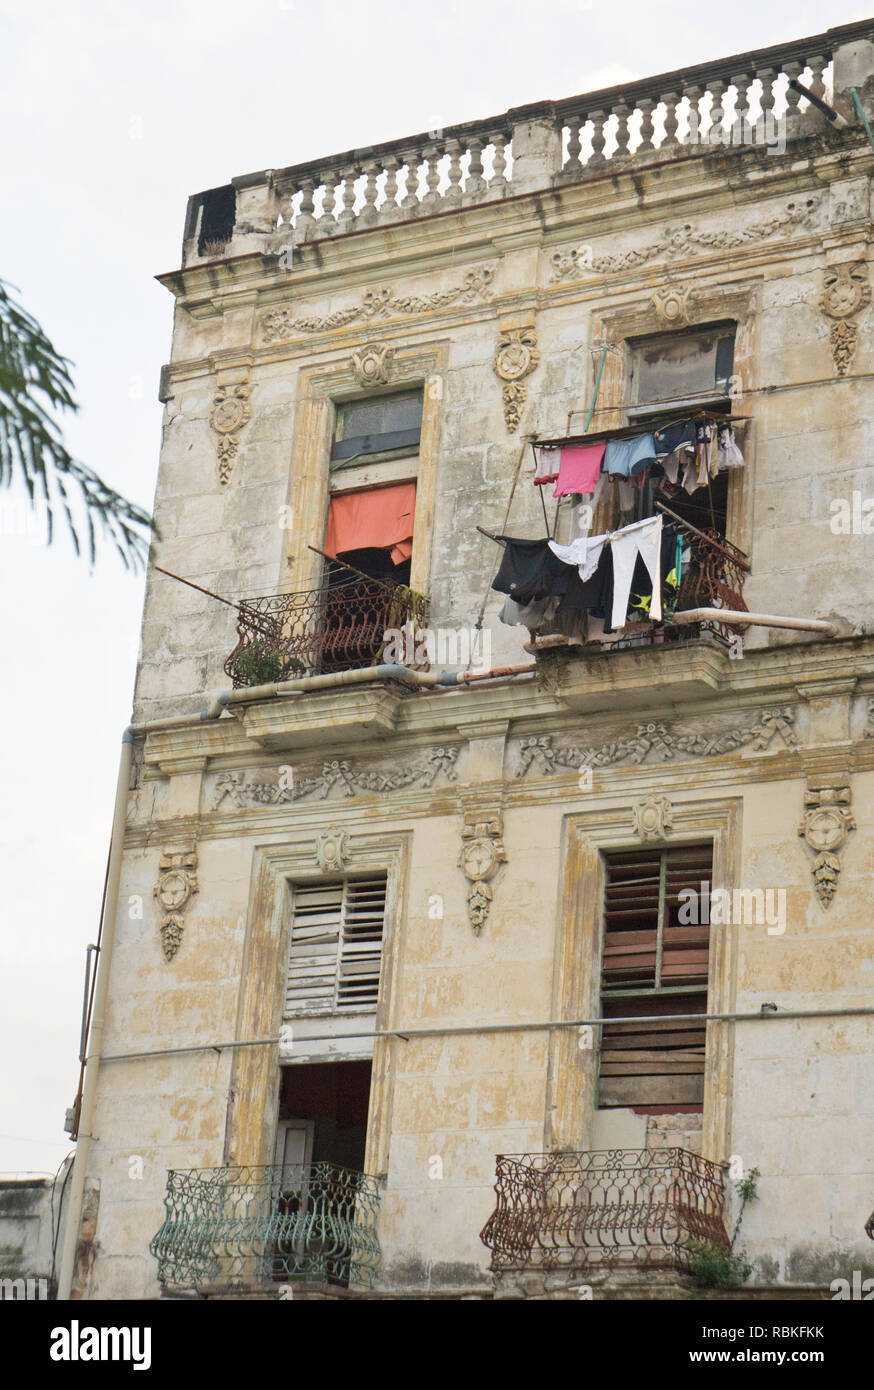 laundry hung outside windows common sight in Old Havana where elegant mansions were confiscated for apartments & facades oddly preserved by neglect Stock Photo